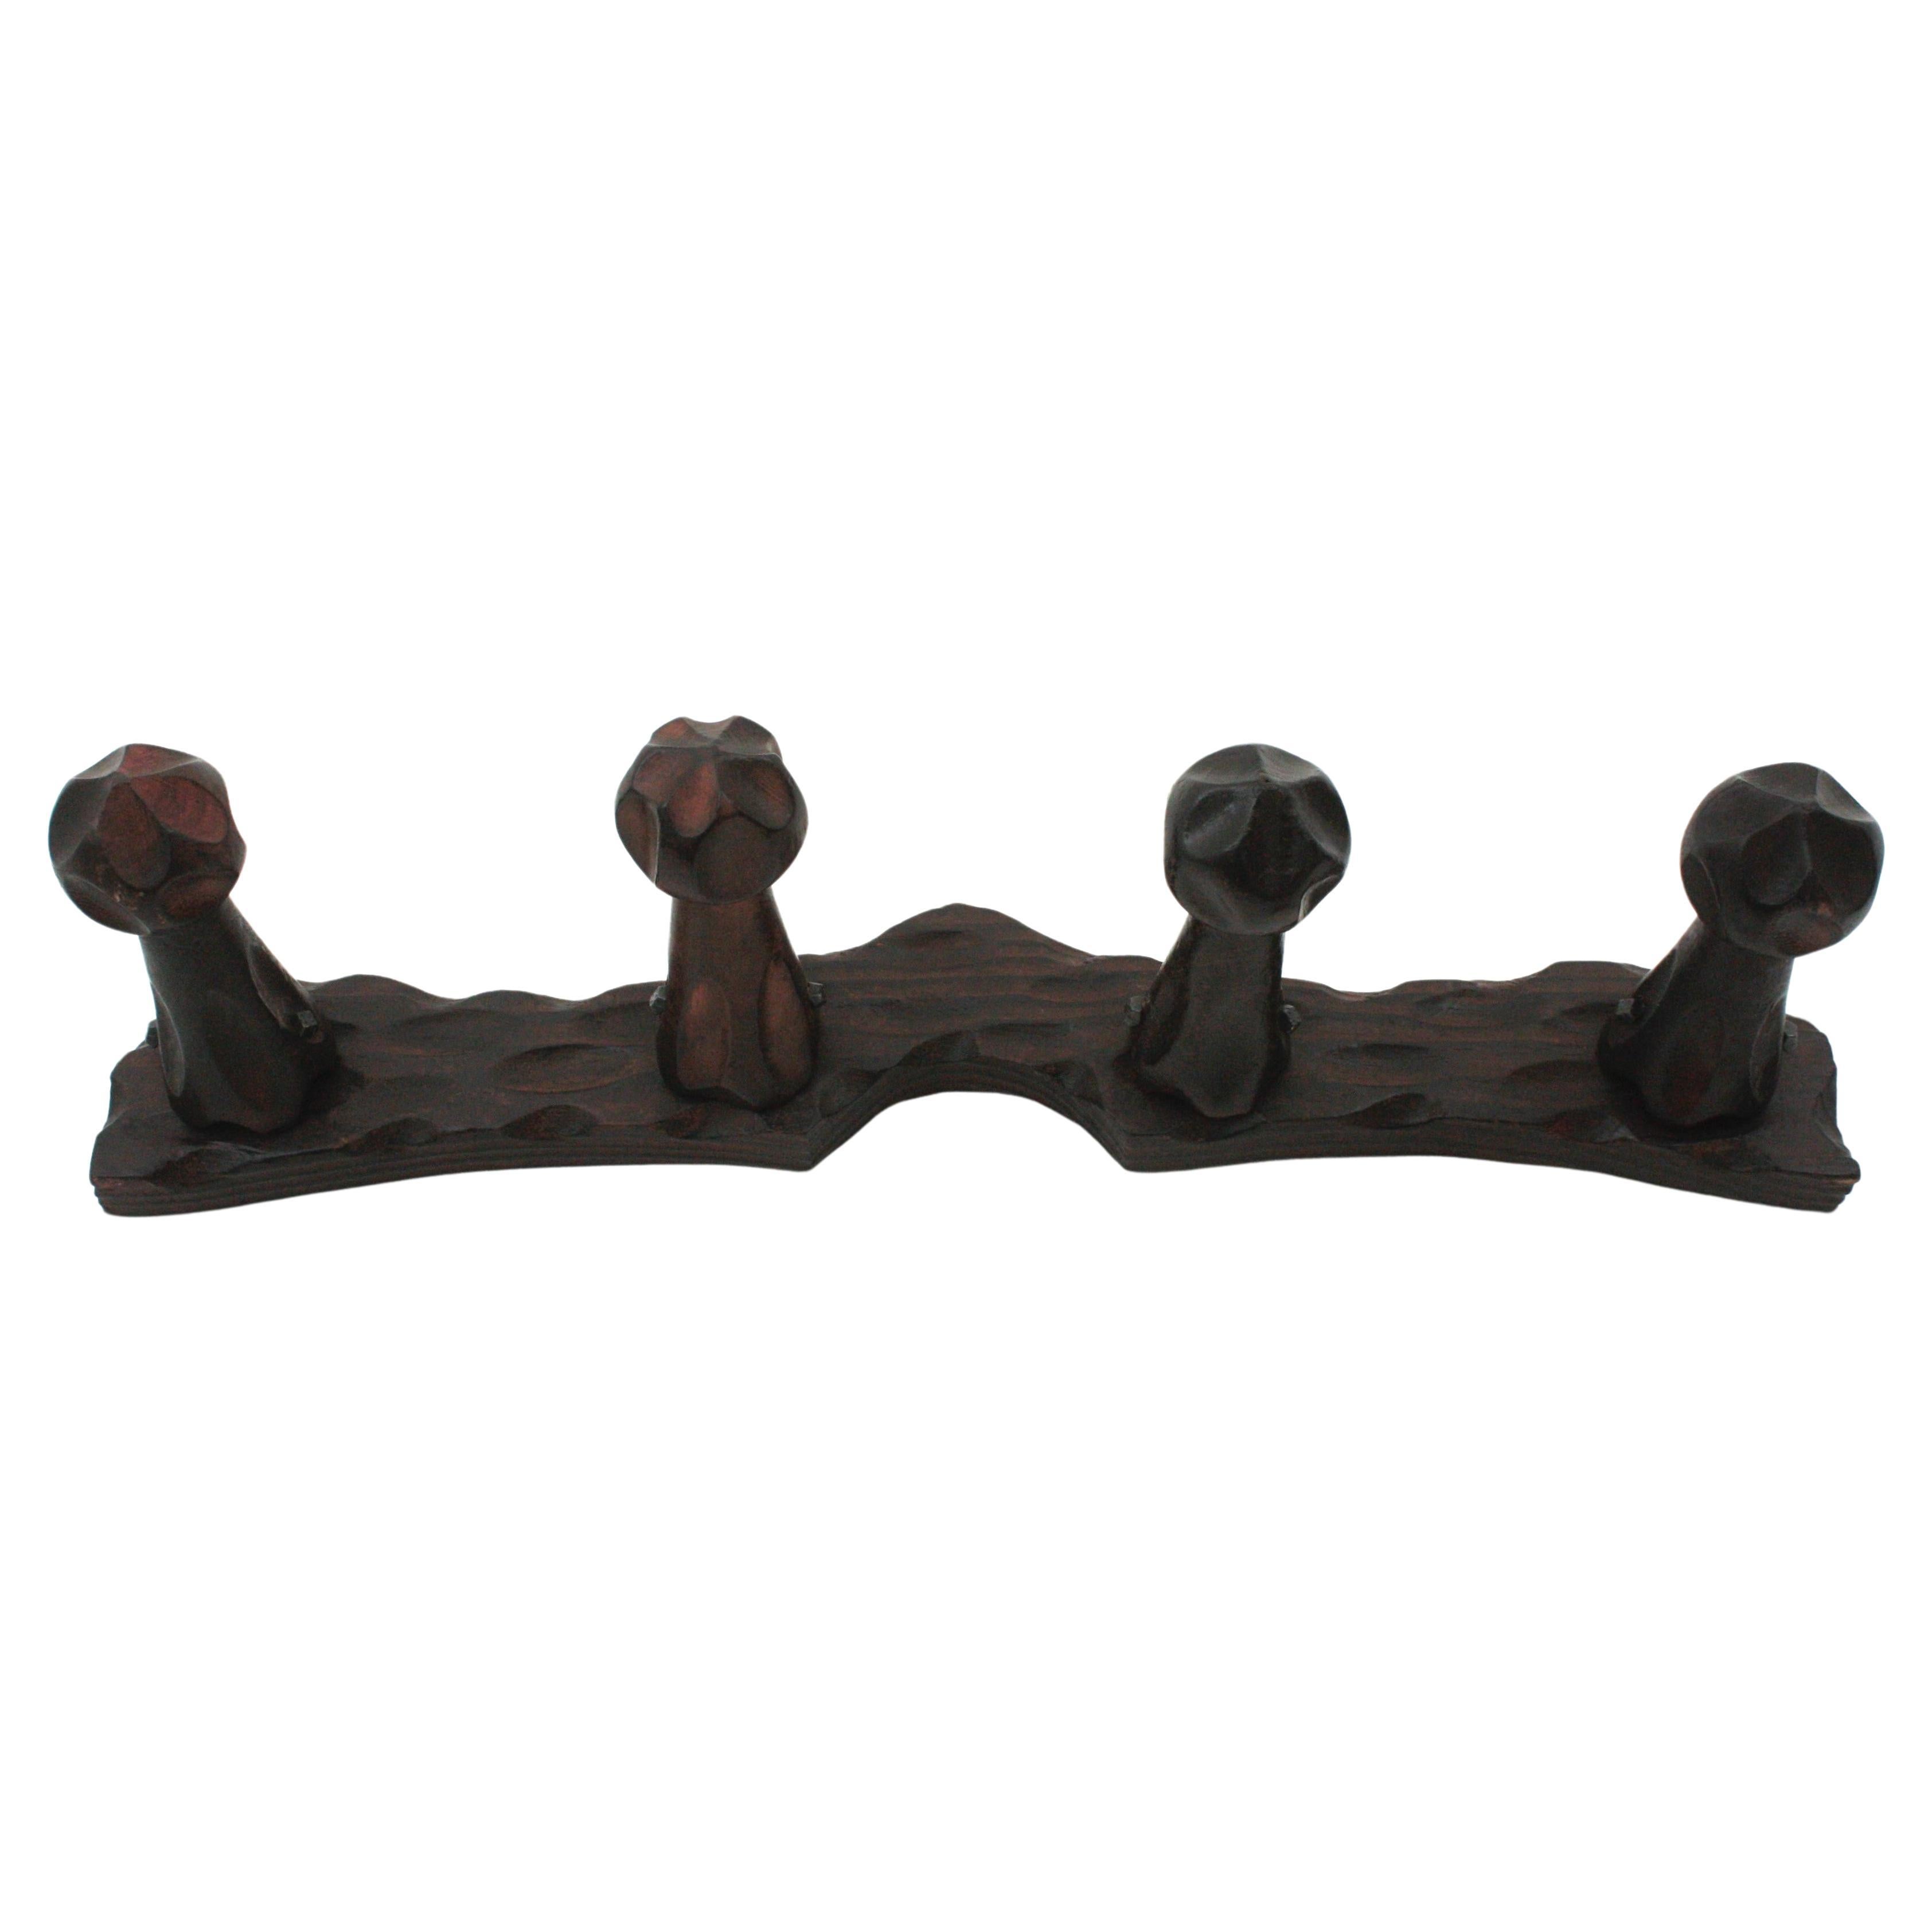 Handcarved pine wood wall coat rack, 4 hangers, Spain, 1940s.
This eye-catching coat rack was designed in the style of Brutalism with 4 Free from carved hangers.
Made of solid wood. Iron nails accents.
To be used a wall coat rack or hat rack.
It